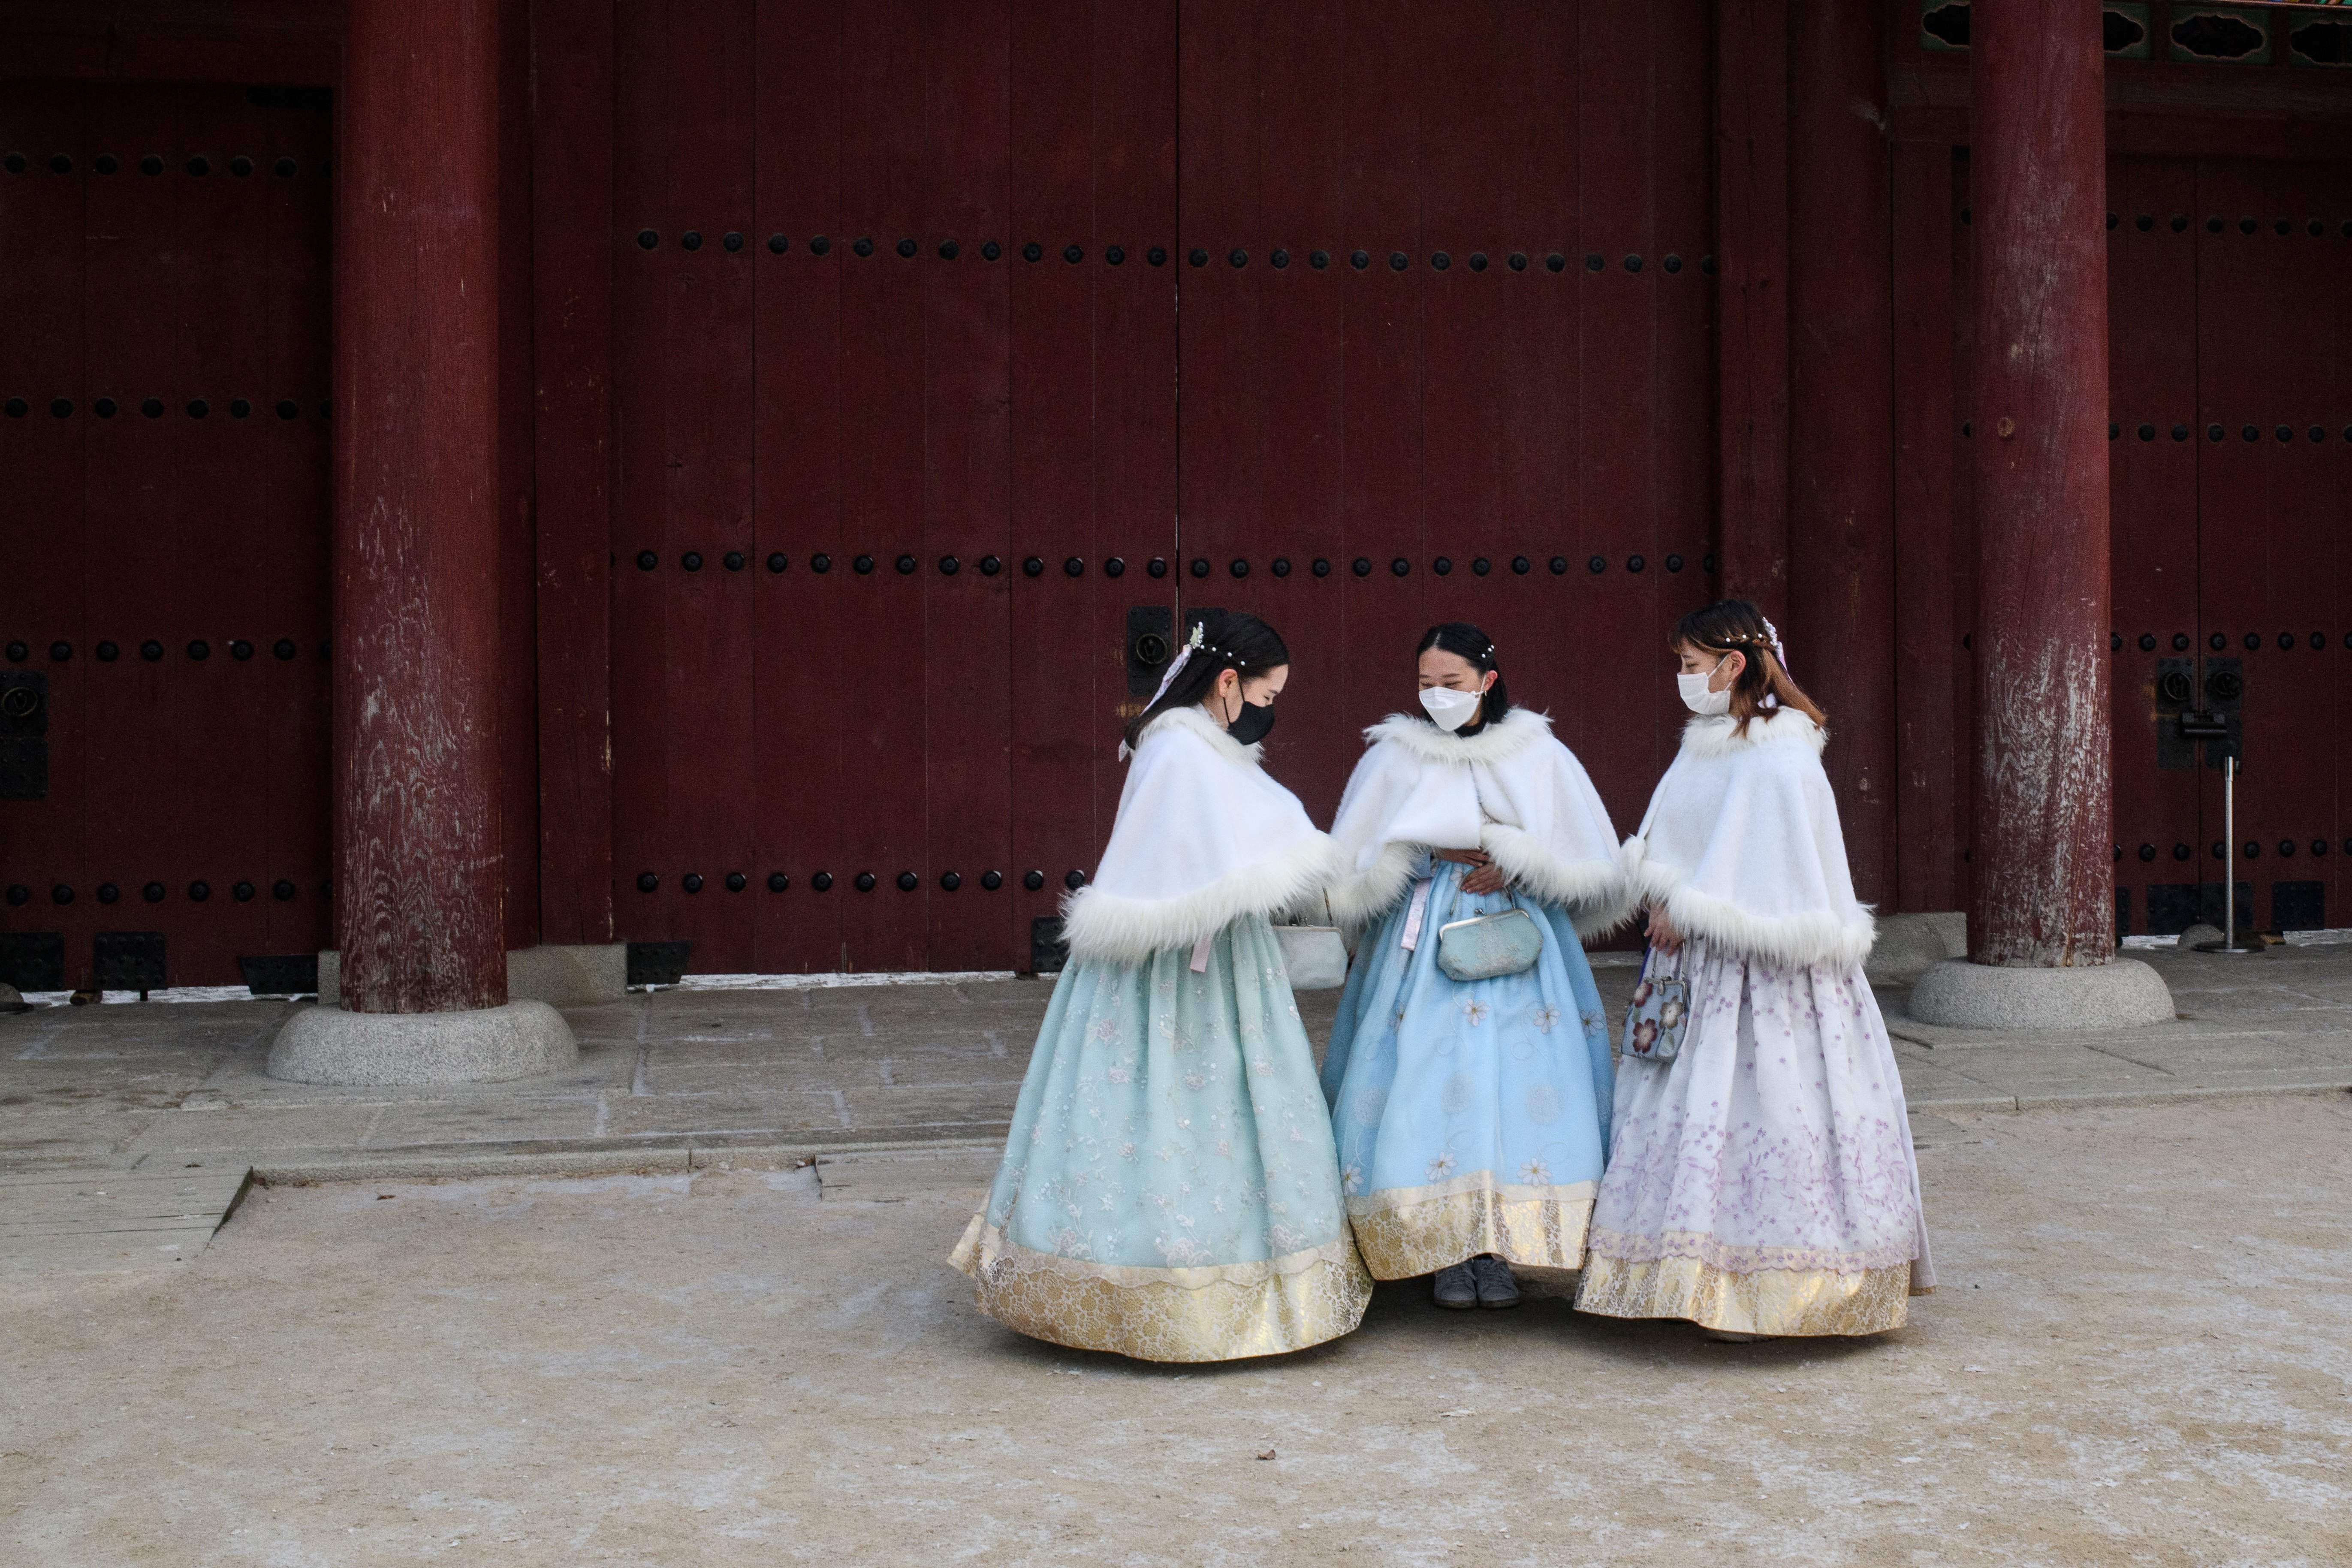 Visitors wear traditional hanbok dress on the grounds of the Gyeongbokgung Palace in Seoul on 17 January 2022